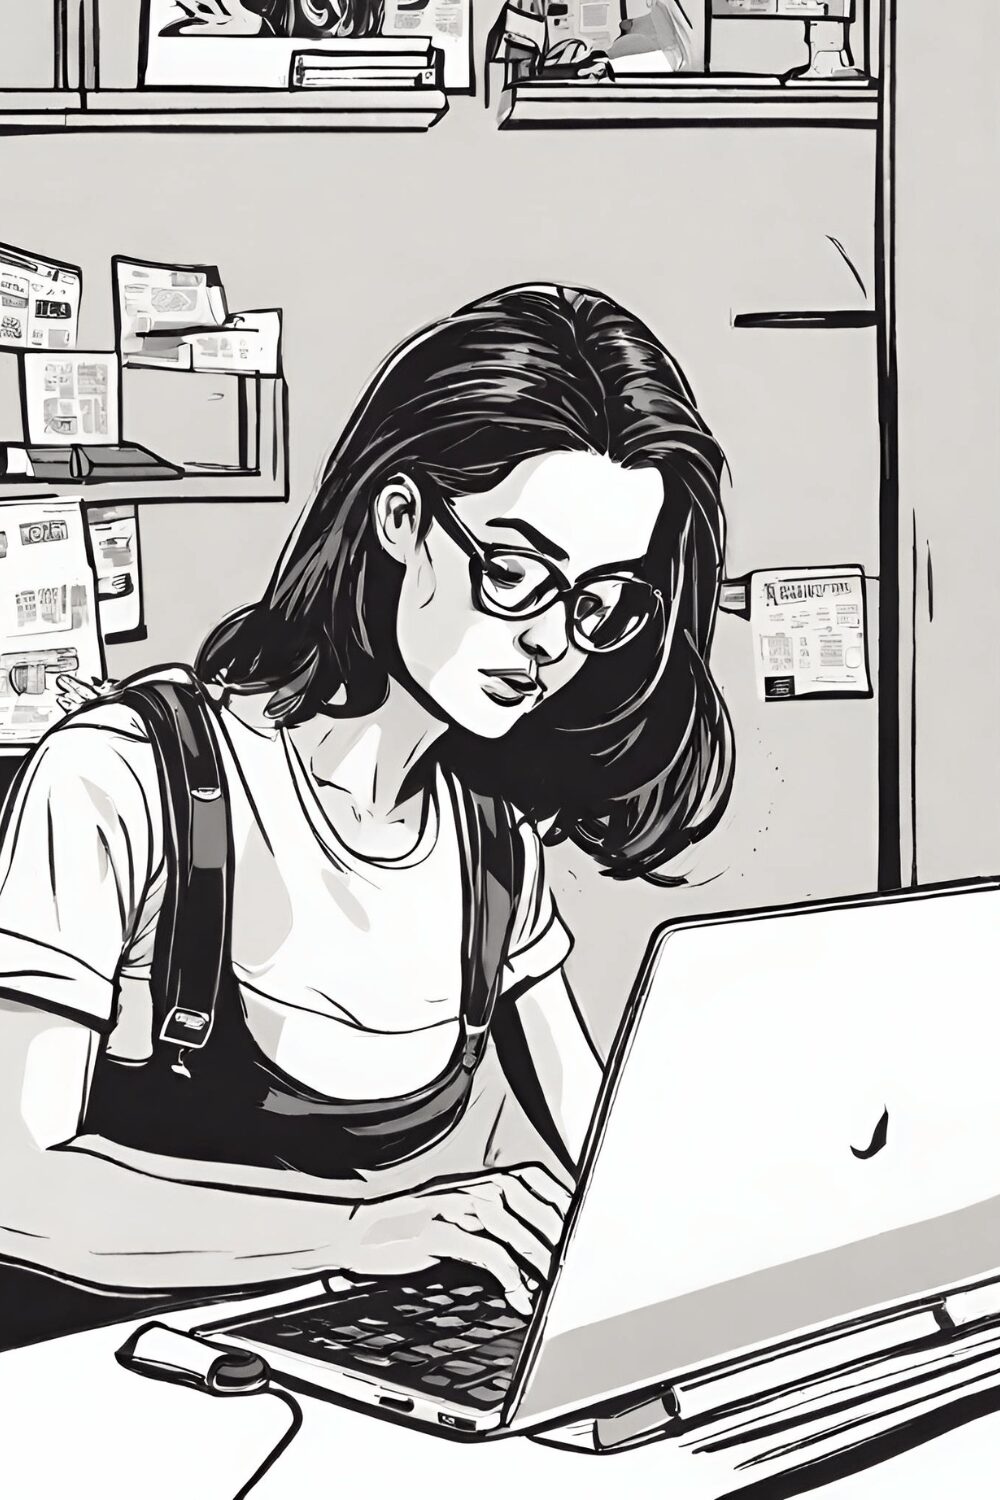 An illustration of a woman sitting at her desk blogging. This illustrated why blogging is so popular